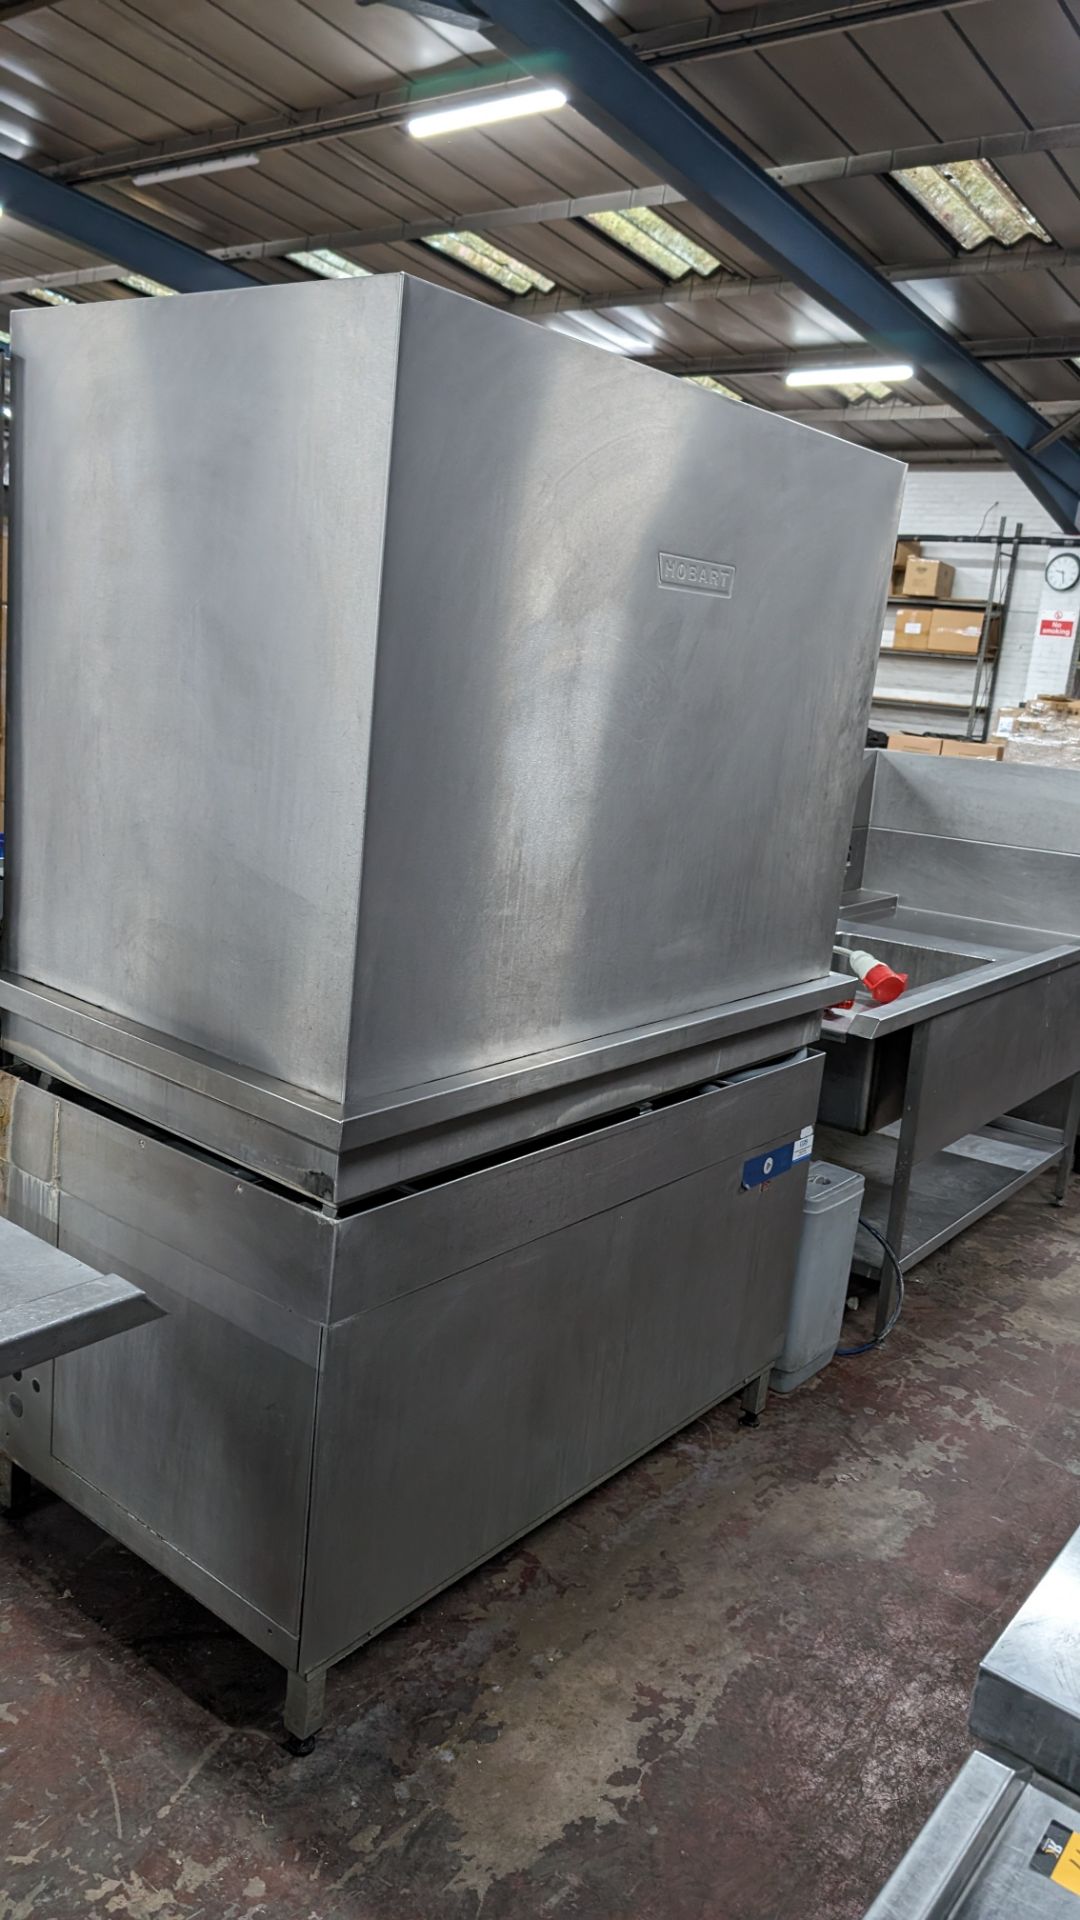 Hobart very large heavy duty commercial pass-through dishwasher including large stainless steel tray - Image 15 of 19